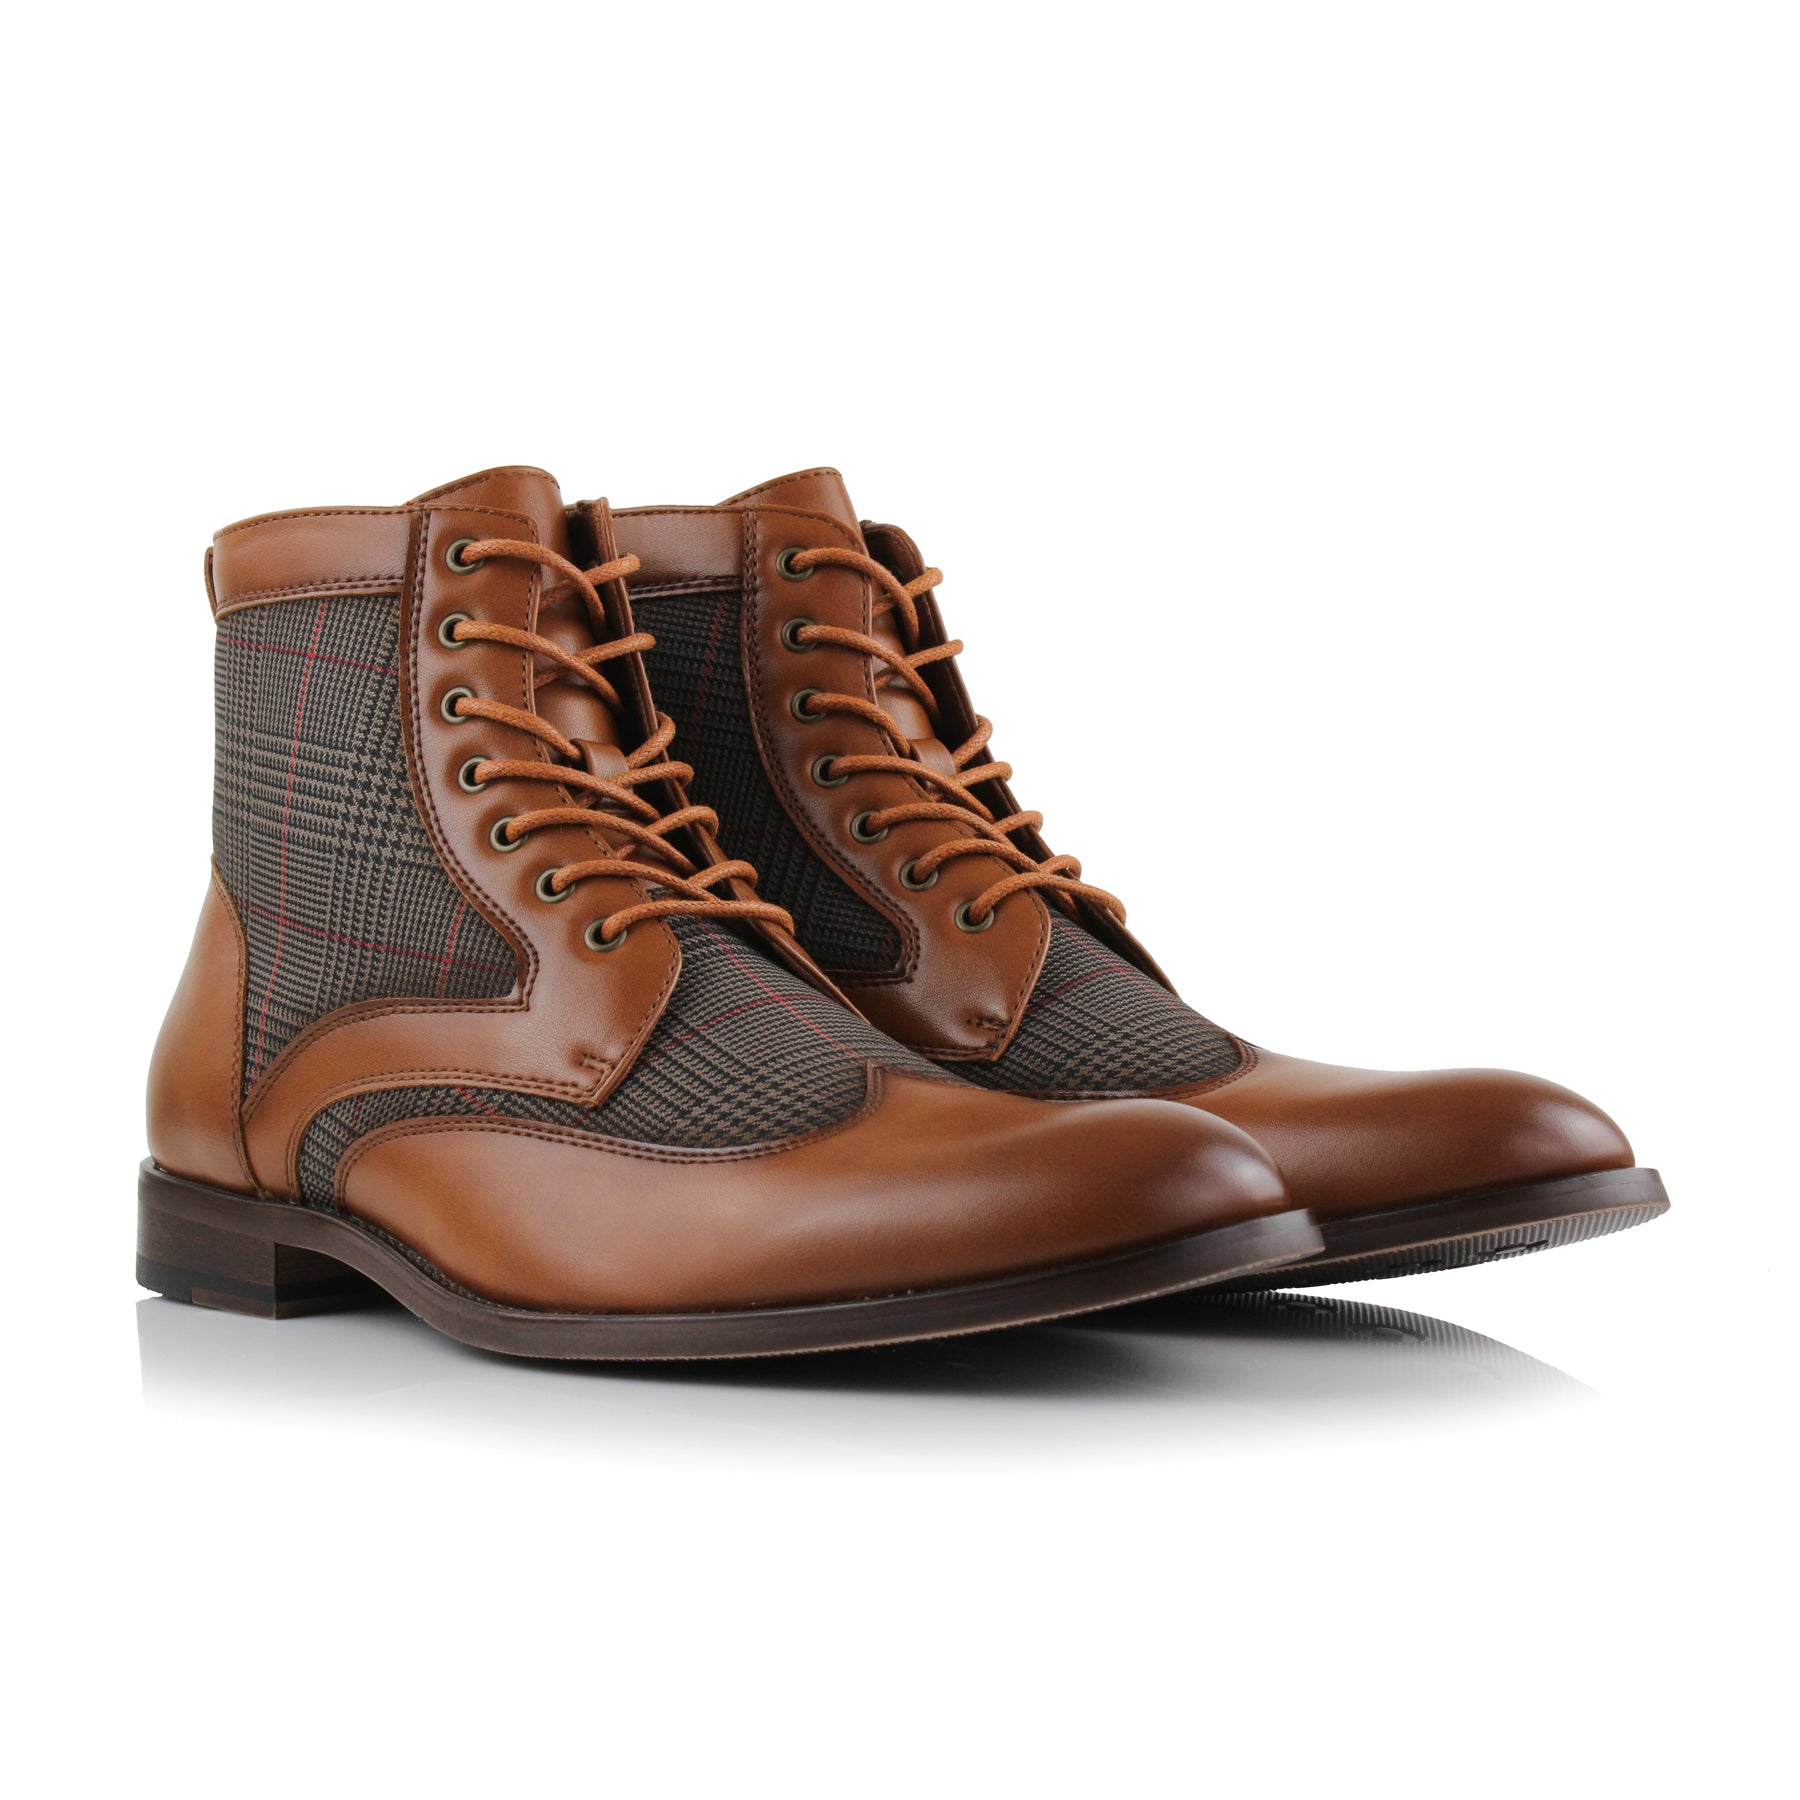 Plaid Wingtip Boots | Gideon by Ferro Aldo | Conal Footwear | Paired Angle View